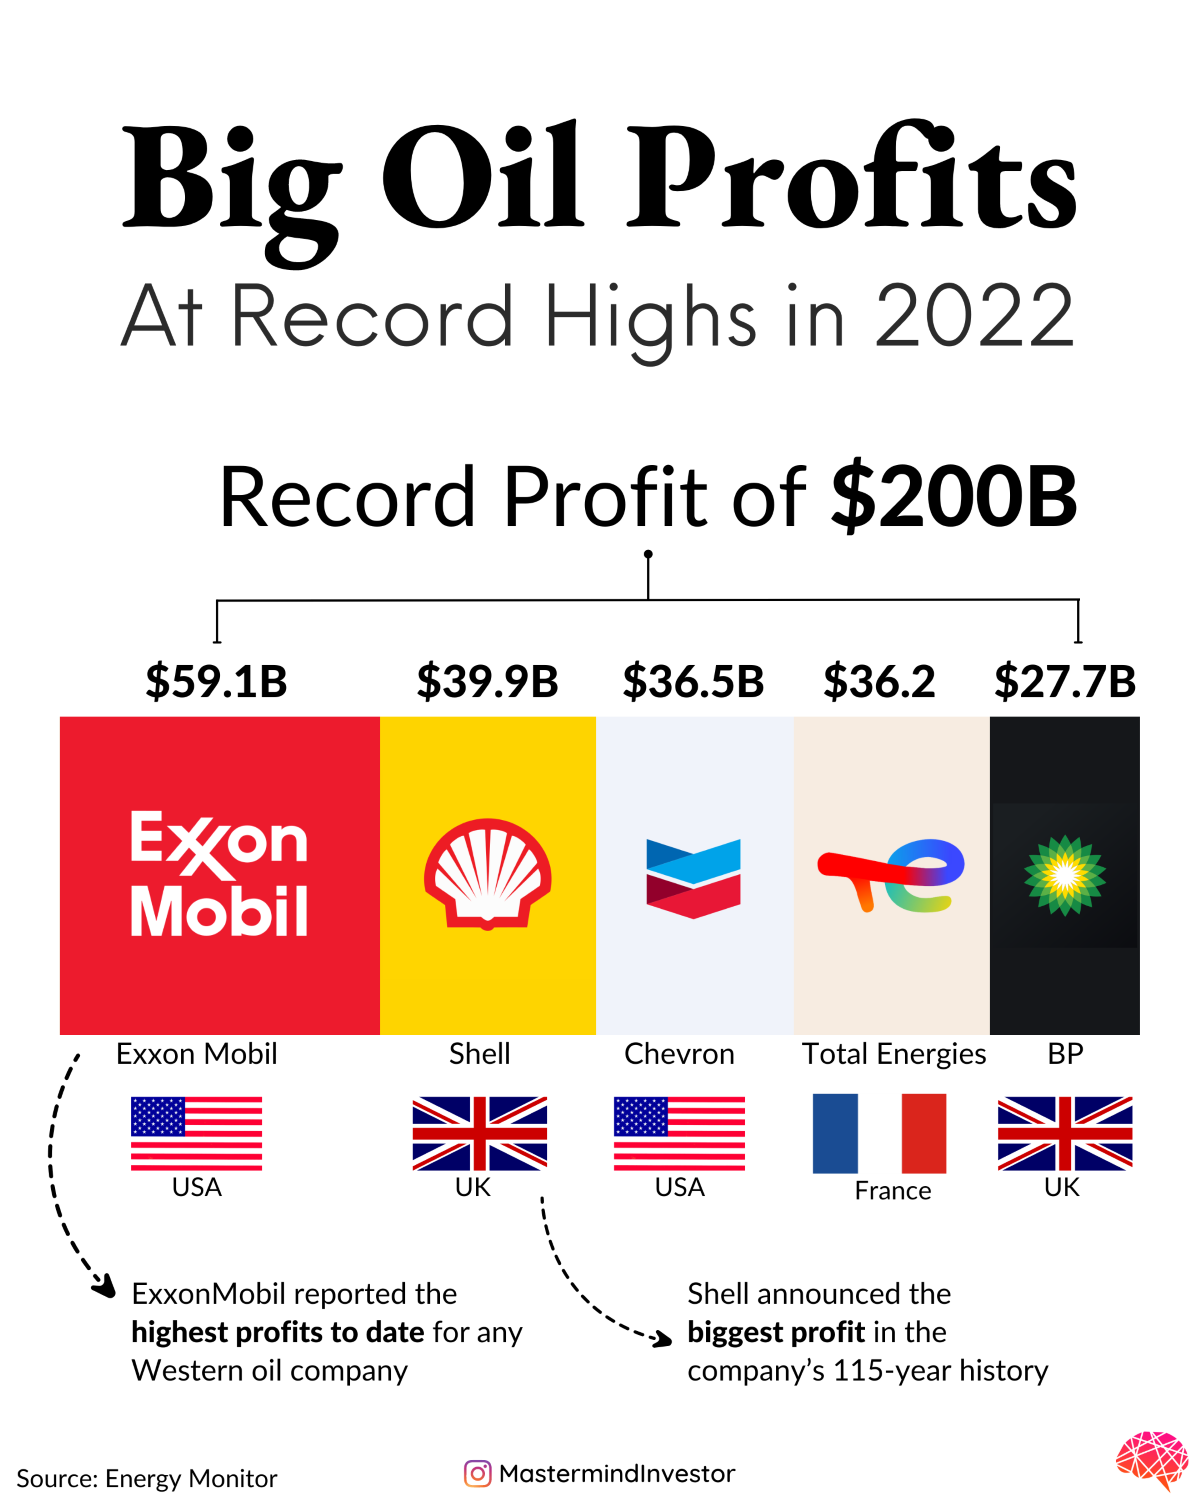 This visual highlights the five big oil companies that doubled their individual profits and earned a combined profit of over $200 billion in 2022.